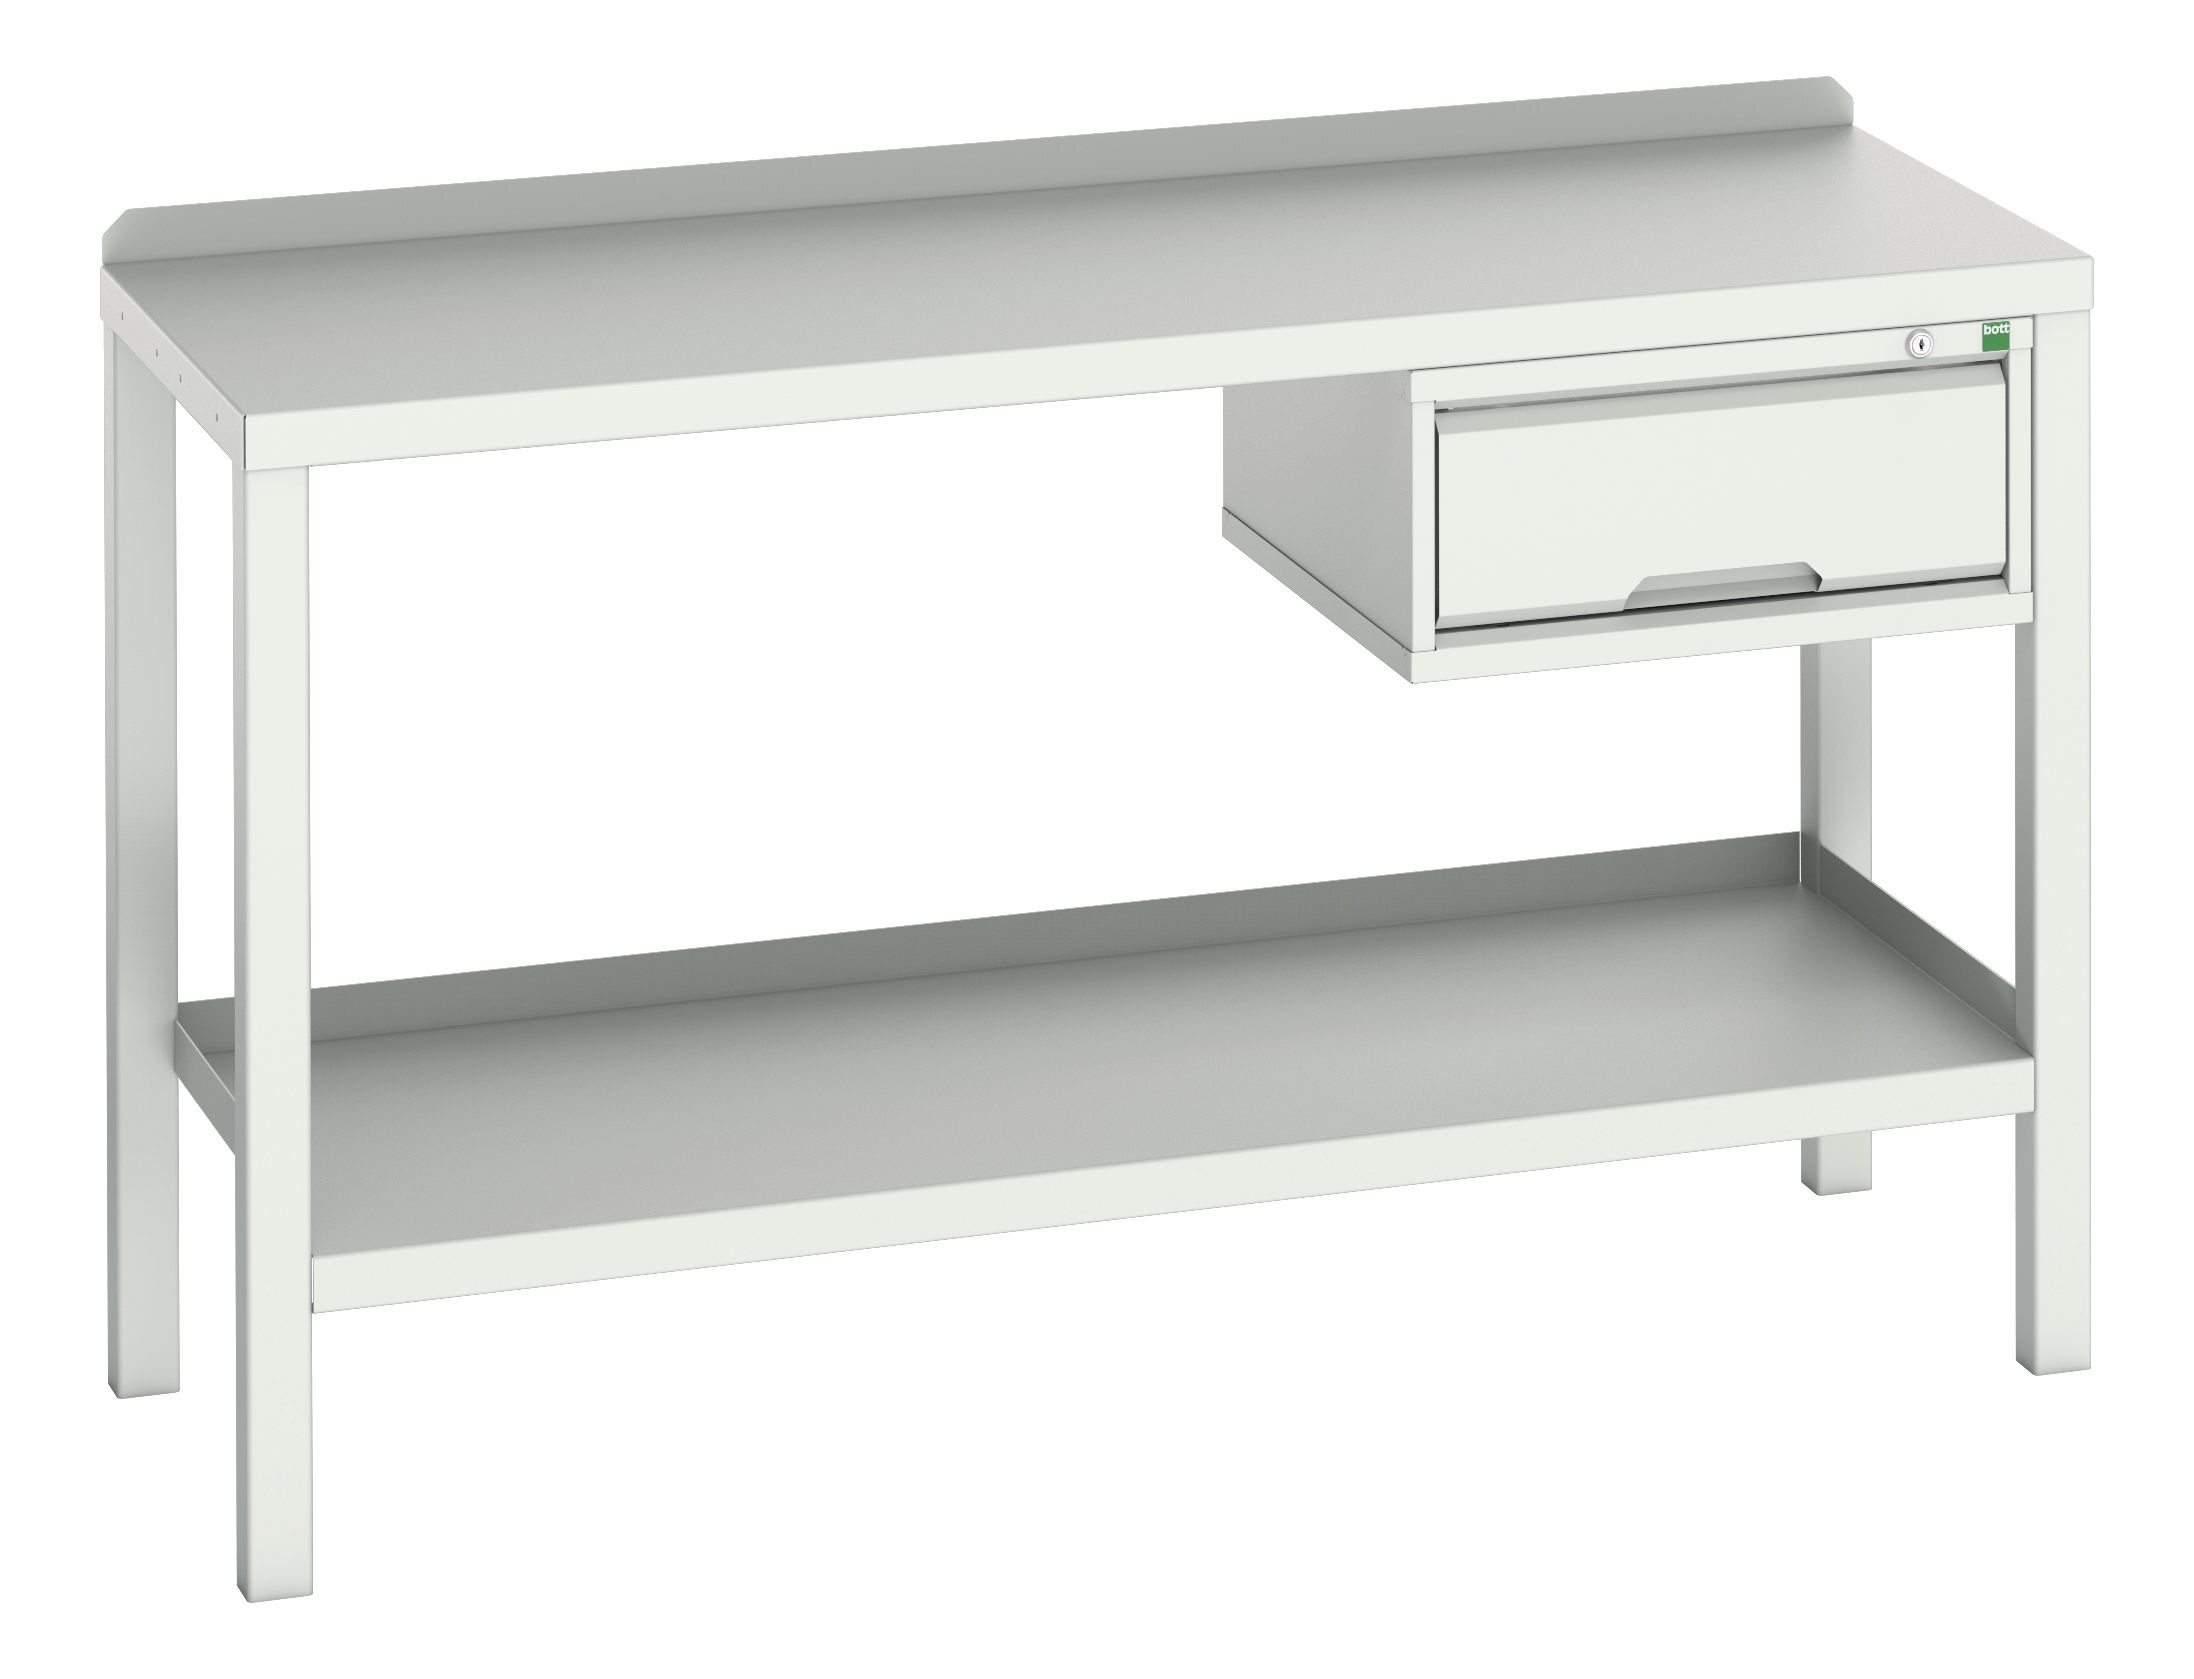 Bott Verso Welded Bench With 1 Drawer Cabinet - 16922604.16